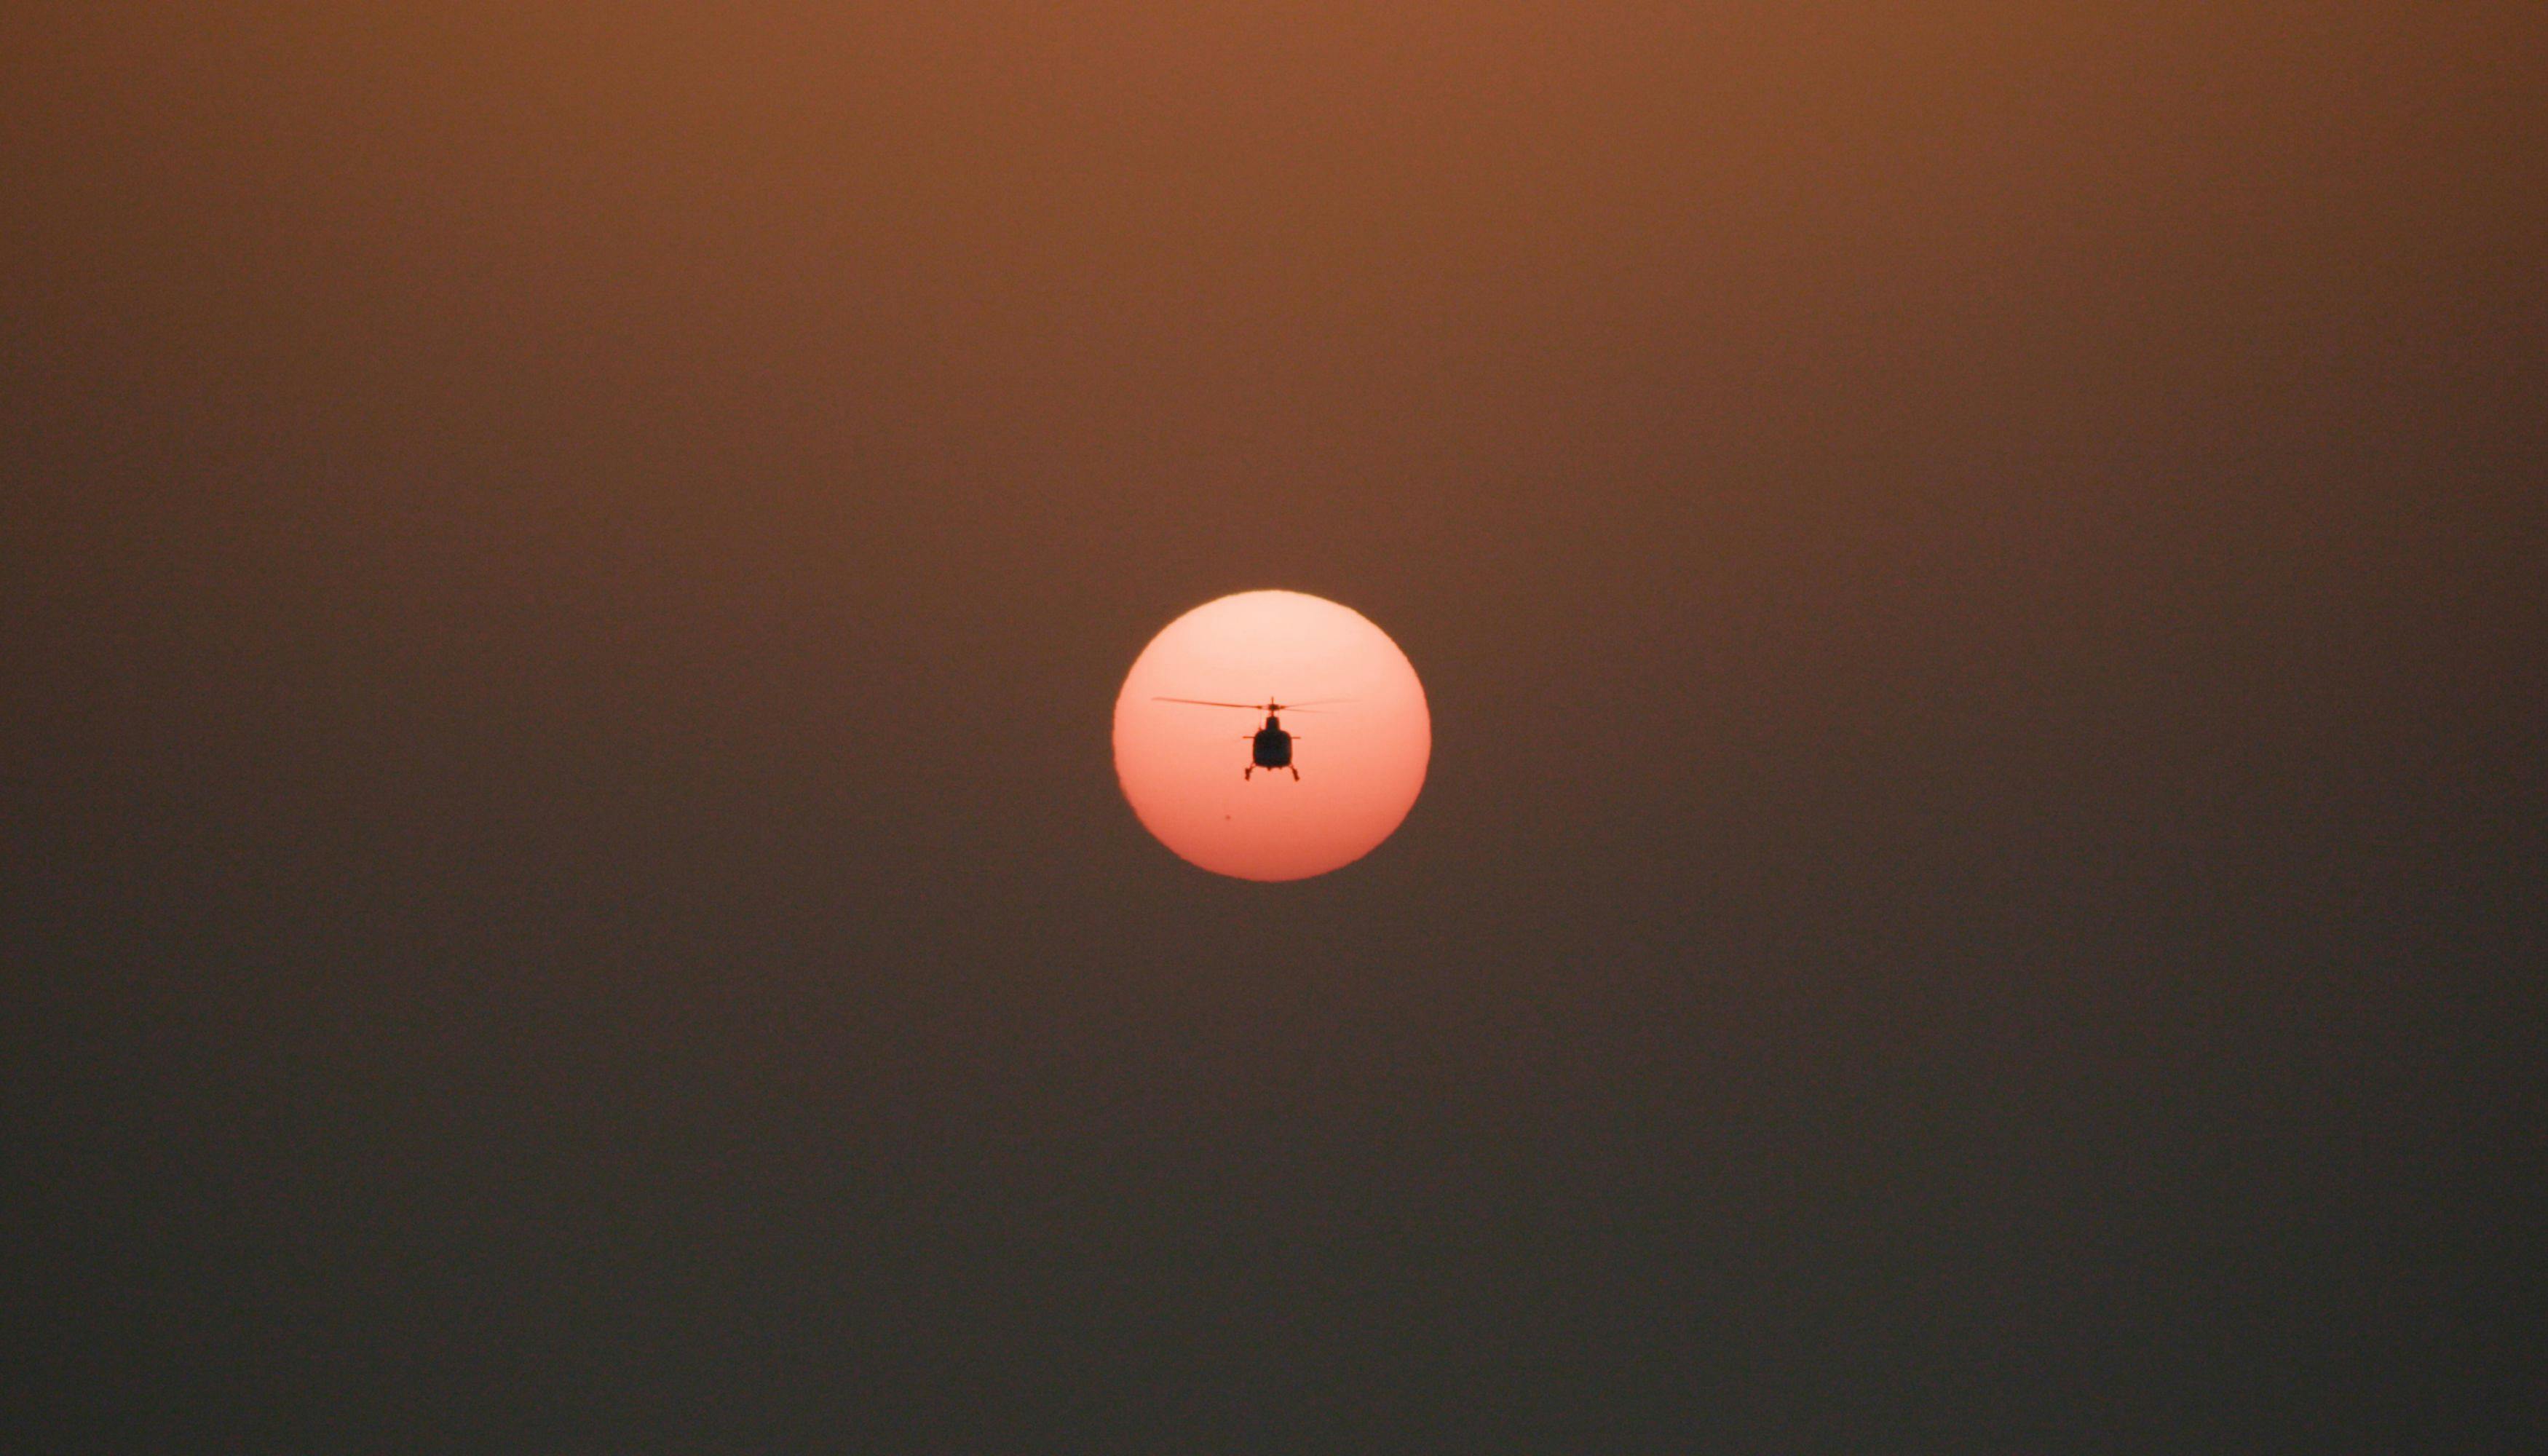 A helicopter against the sun